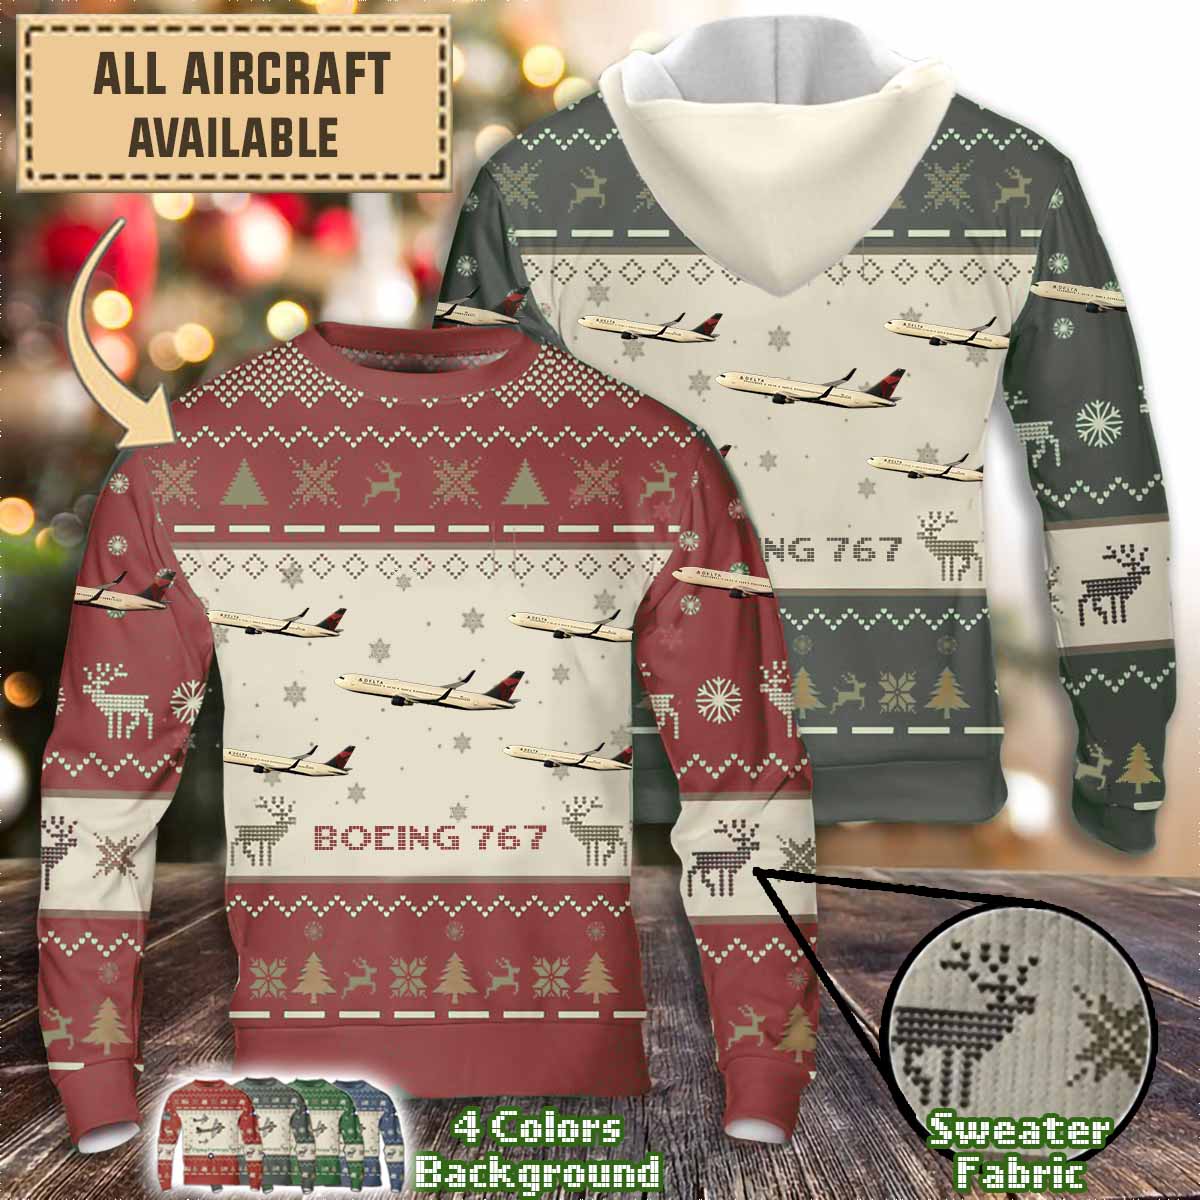 boeing 767aircraft sweater